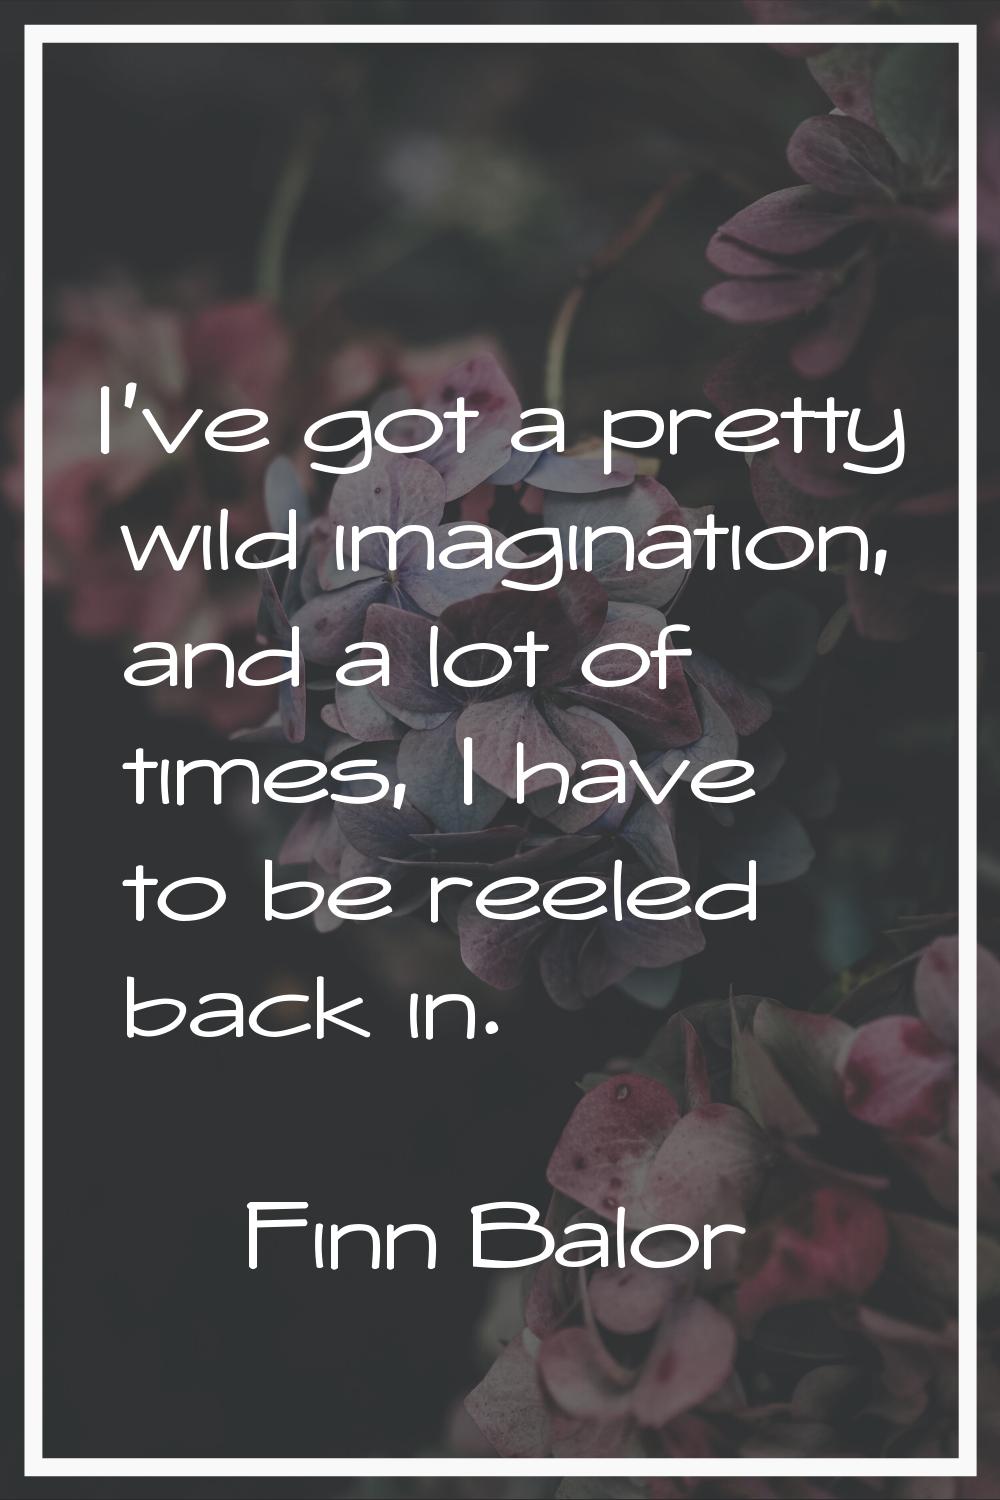 I've got a pretty wild imagination, and a lot of times, I have to be reeled back in.